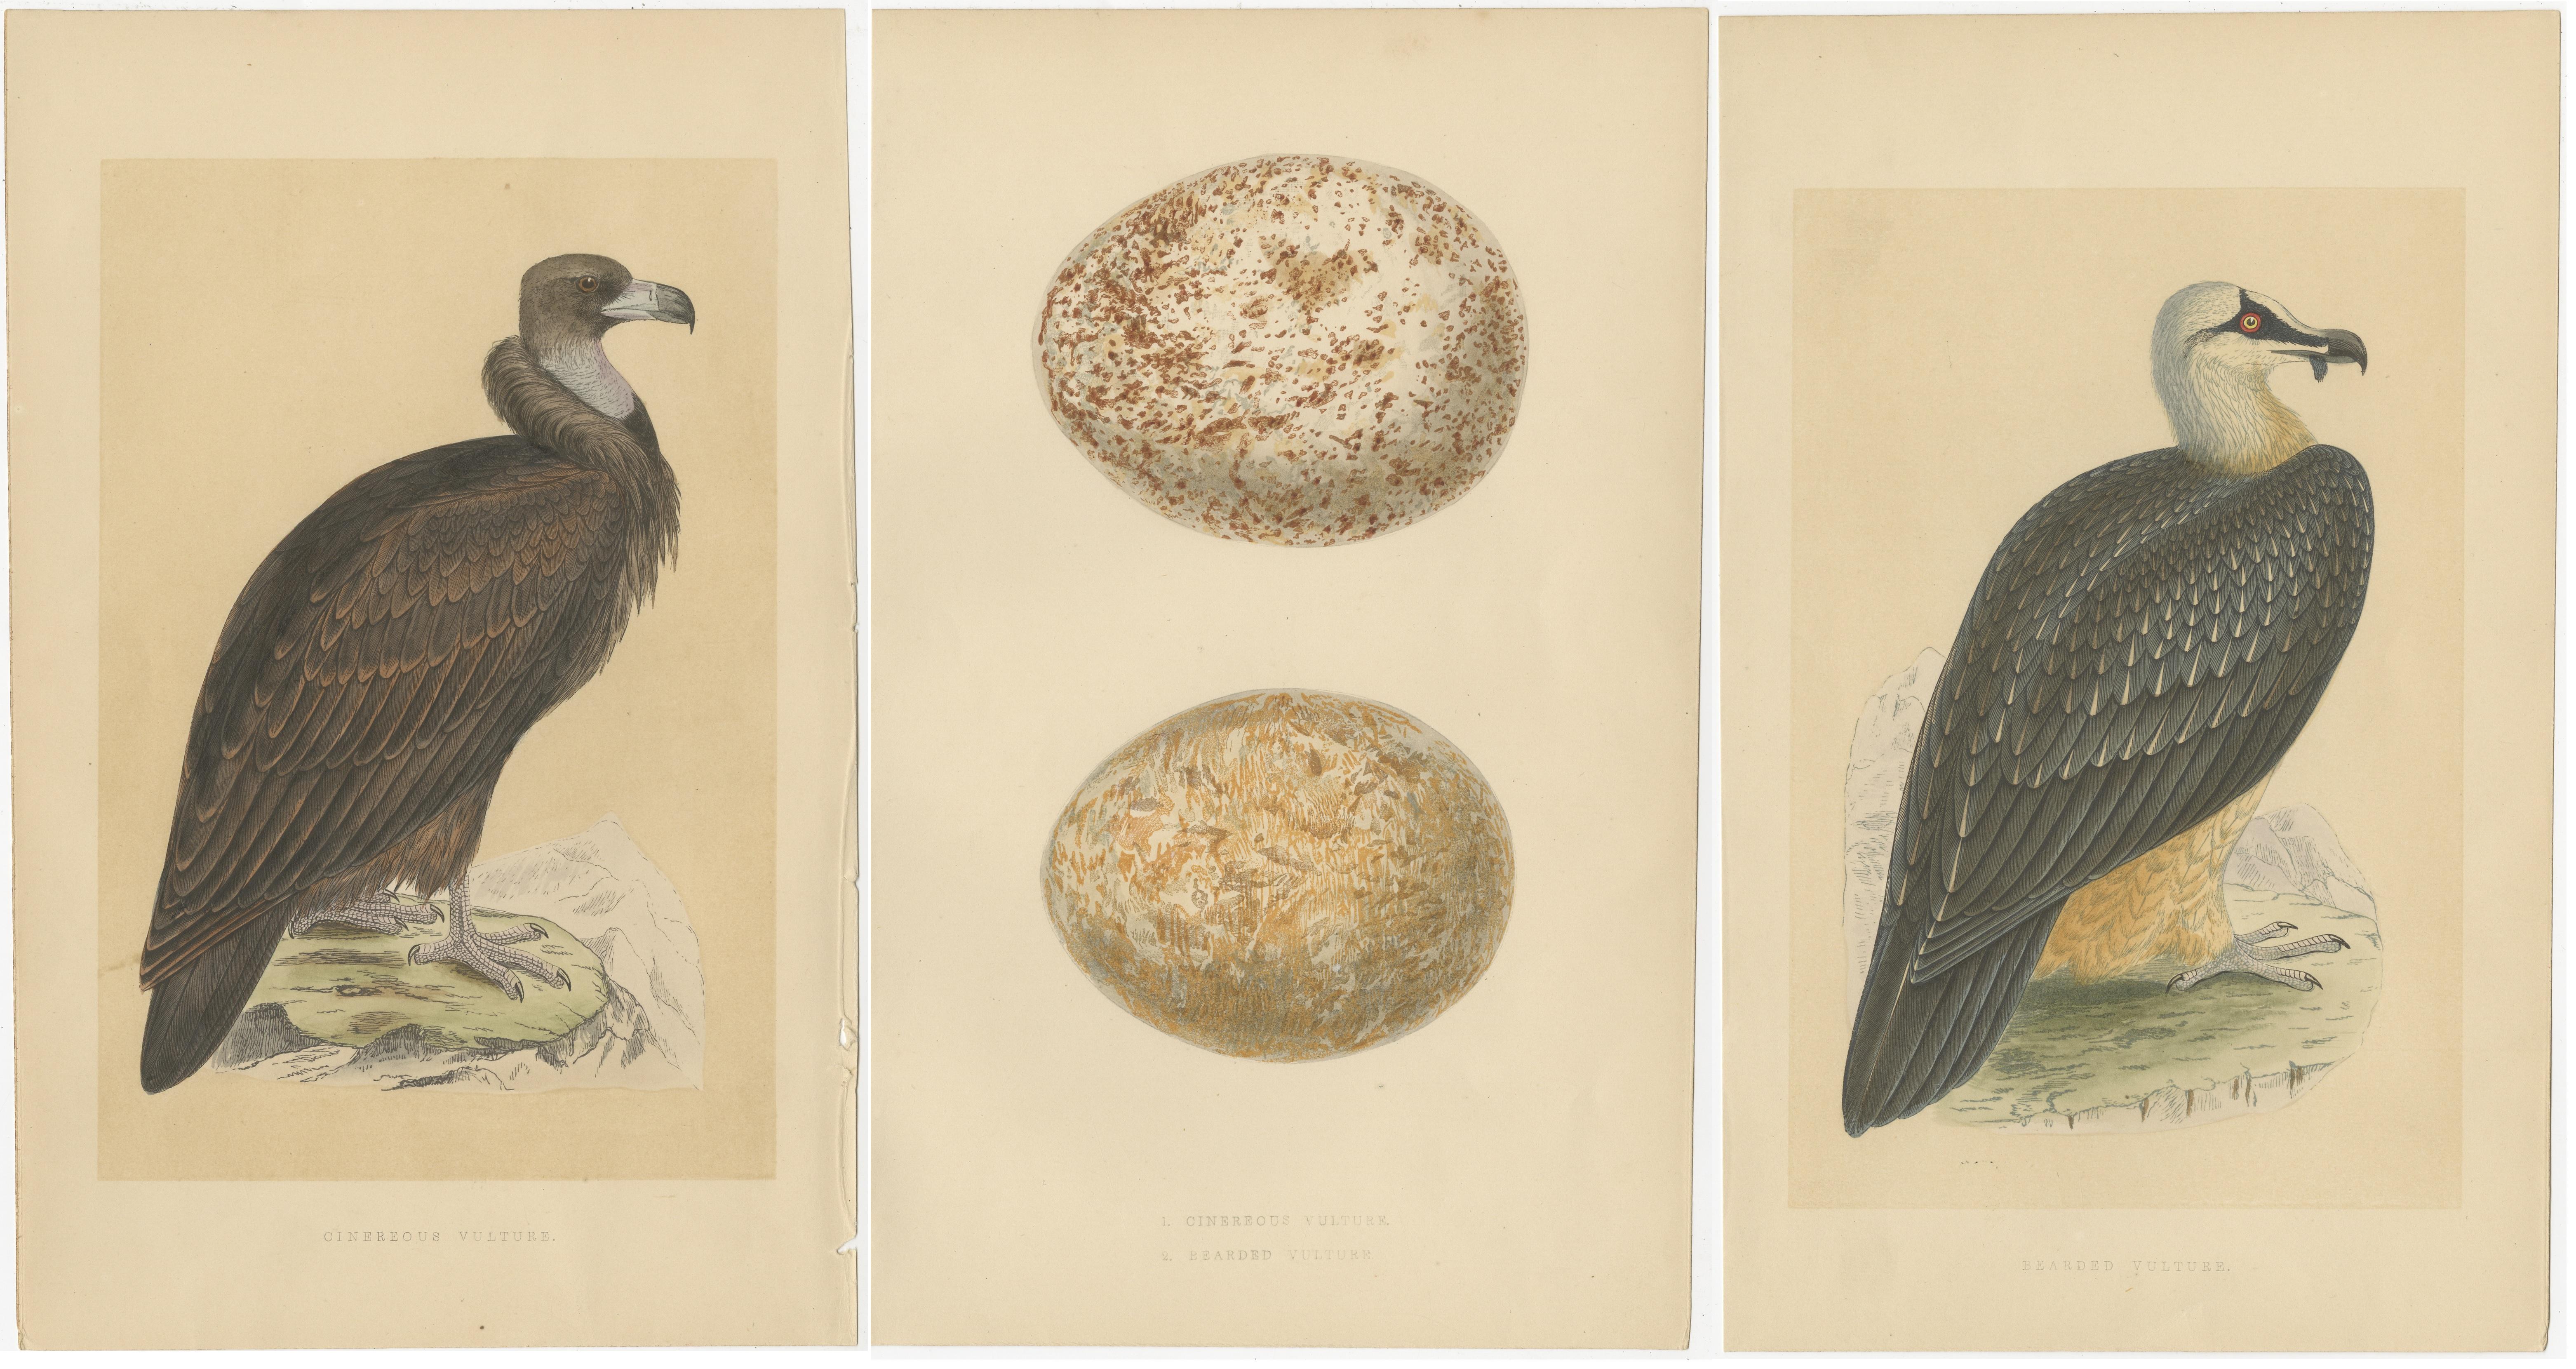 Set of three antique birds prints of a cinereous vulture, bearded vulture and their eggs. These prints originate from 'A history of the birds of Europe, not observed in the British Isles' by Charles Robert Bree and Benjamin Fawcett. Published circa